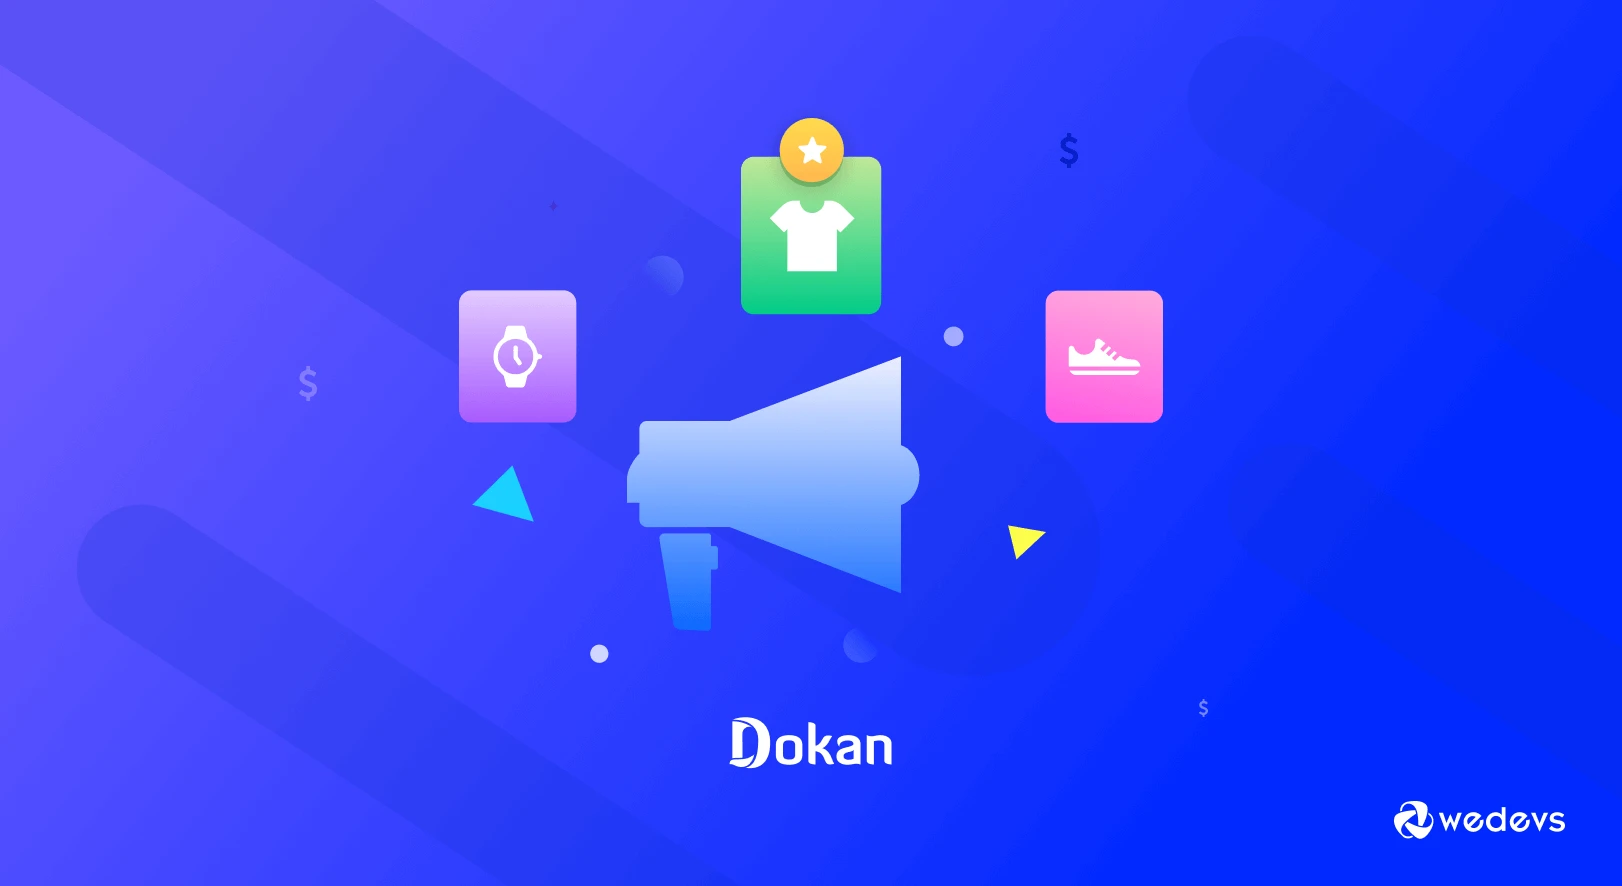 Dokan Product Advertising- Easy Way to Highlight Your Best Seller Products on Your Marketplace